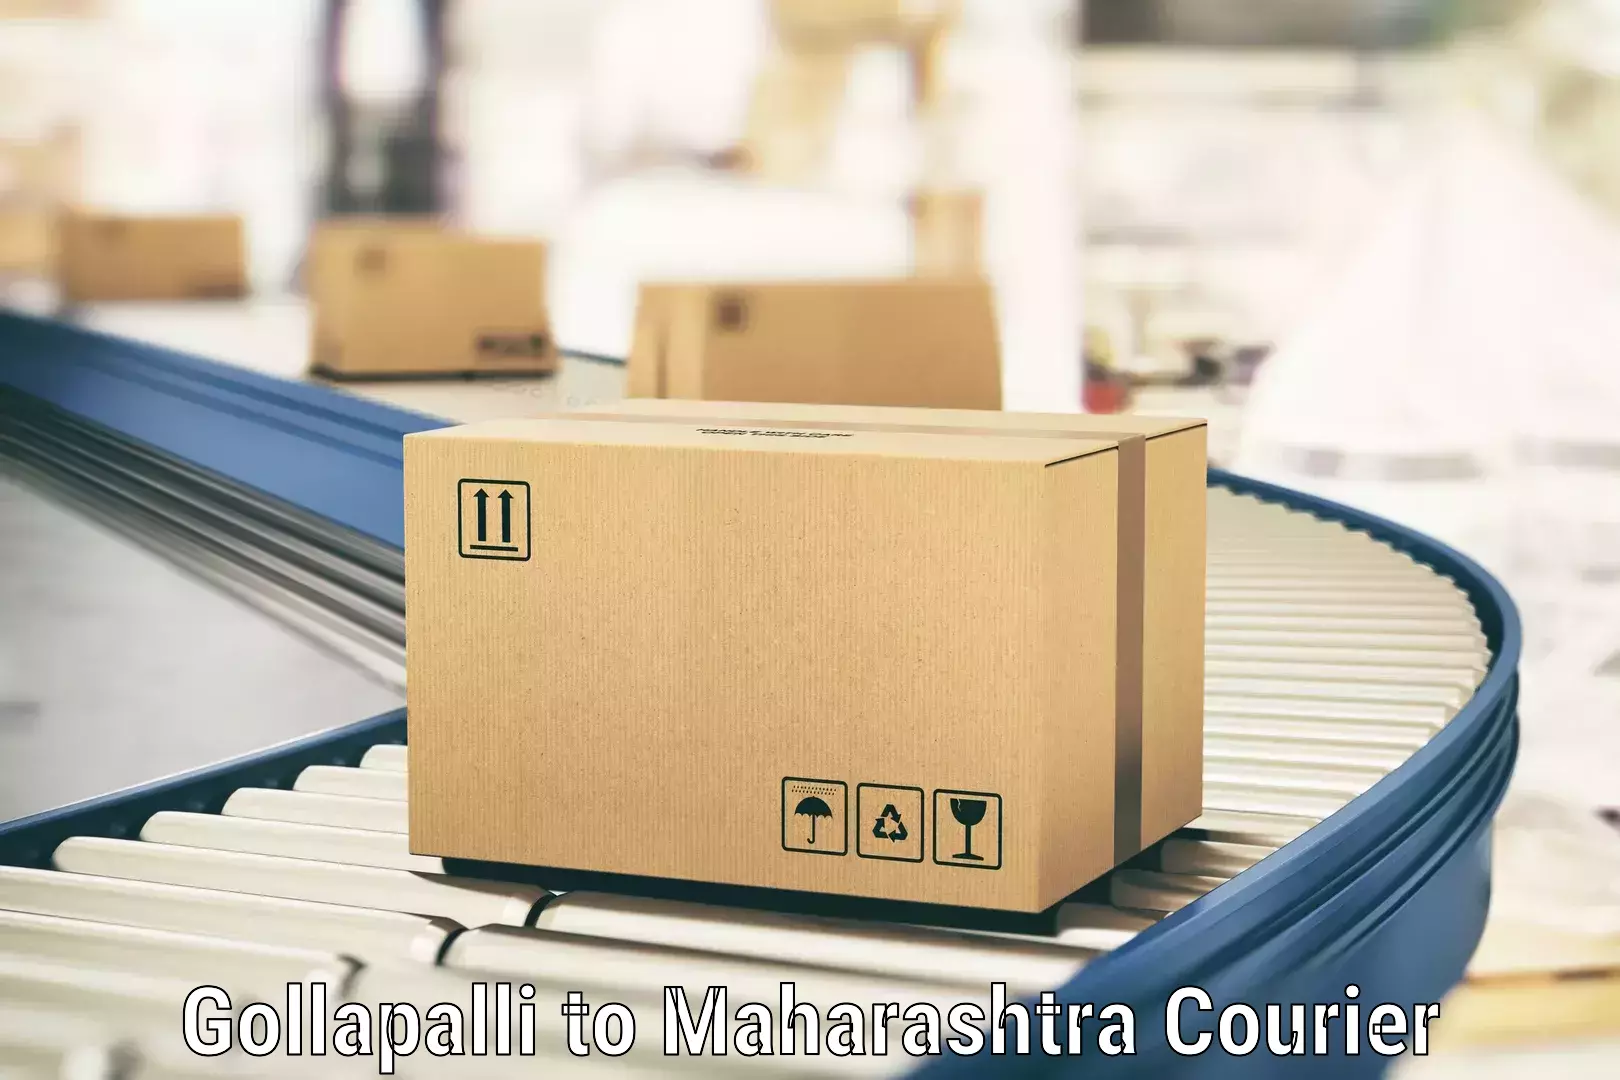 Short distance delivery in Gollapalli to Mahabaleshwar